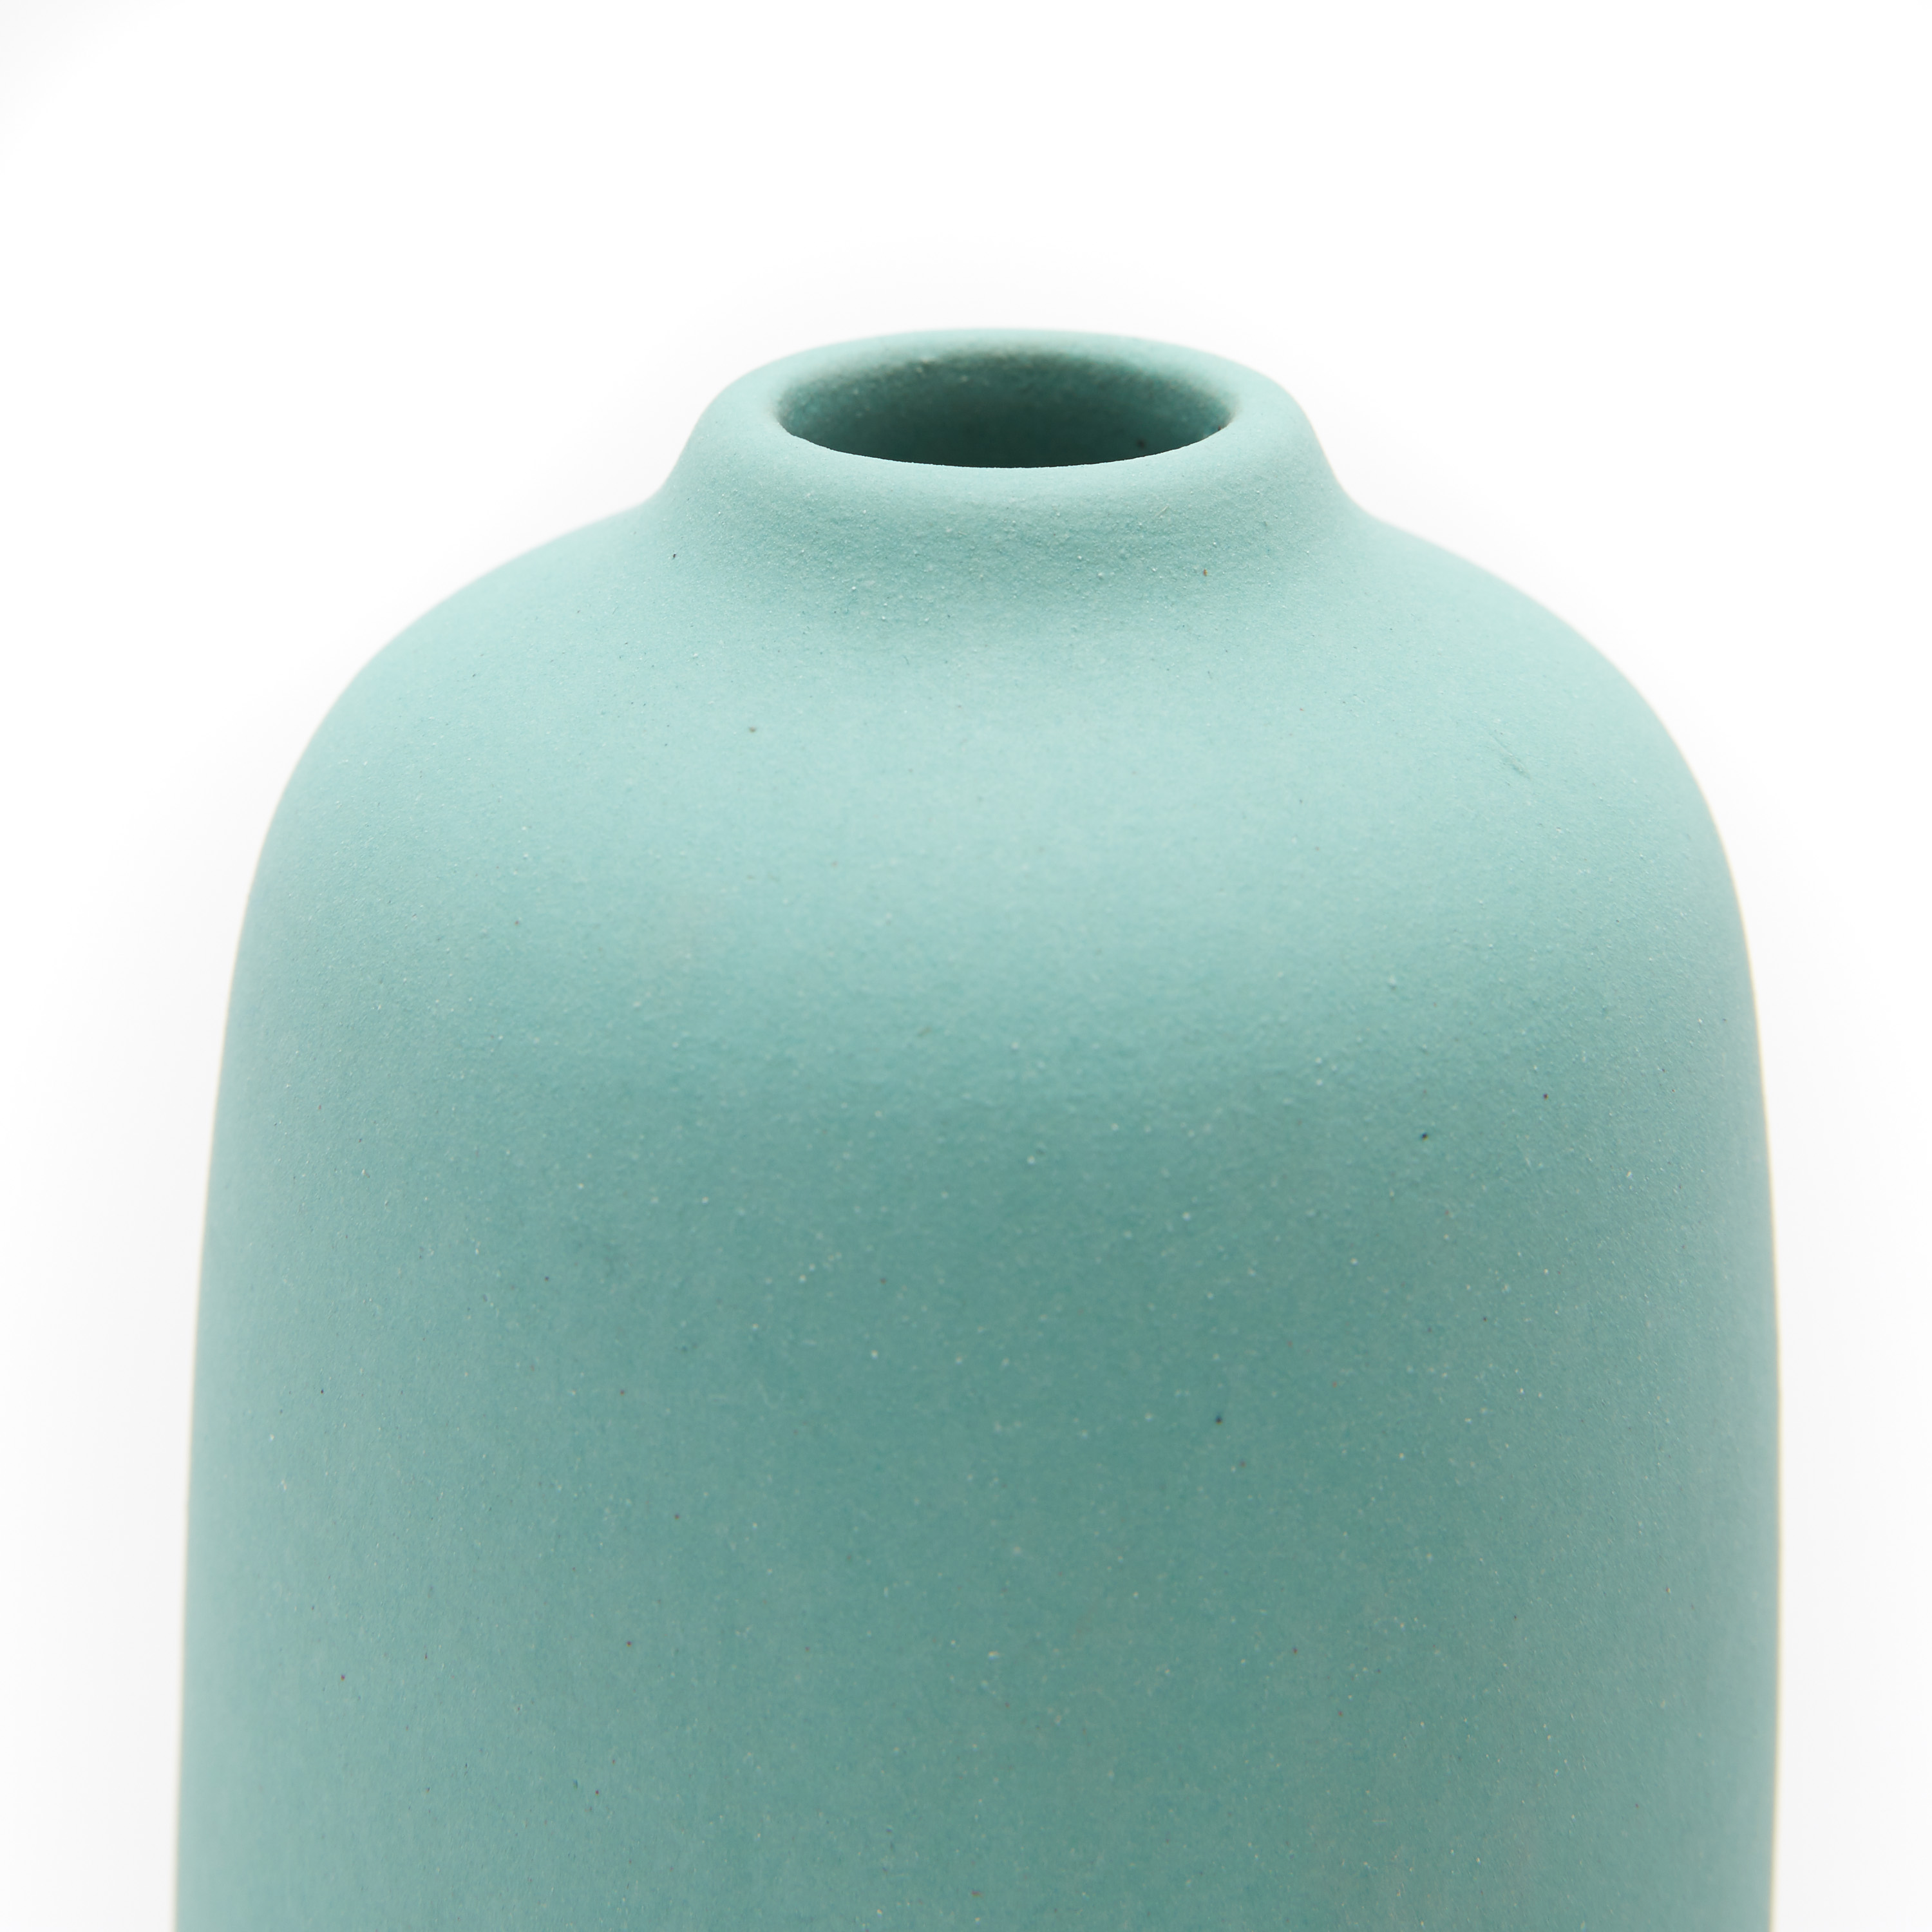 Galway Green Decorative Vase by Drew Barrymore Flower Home - image 5 of 7